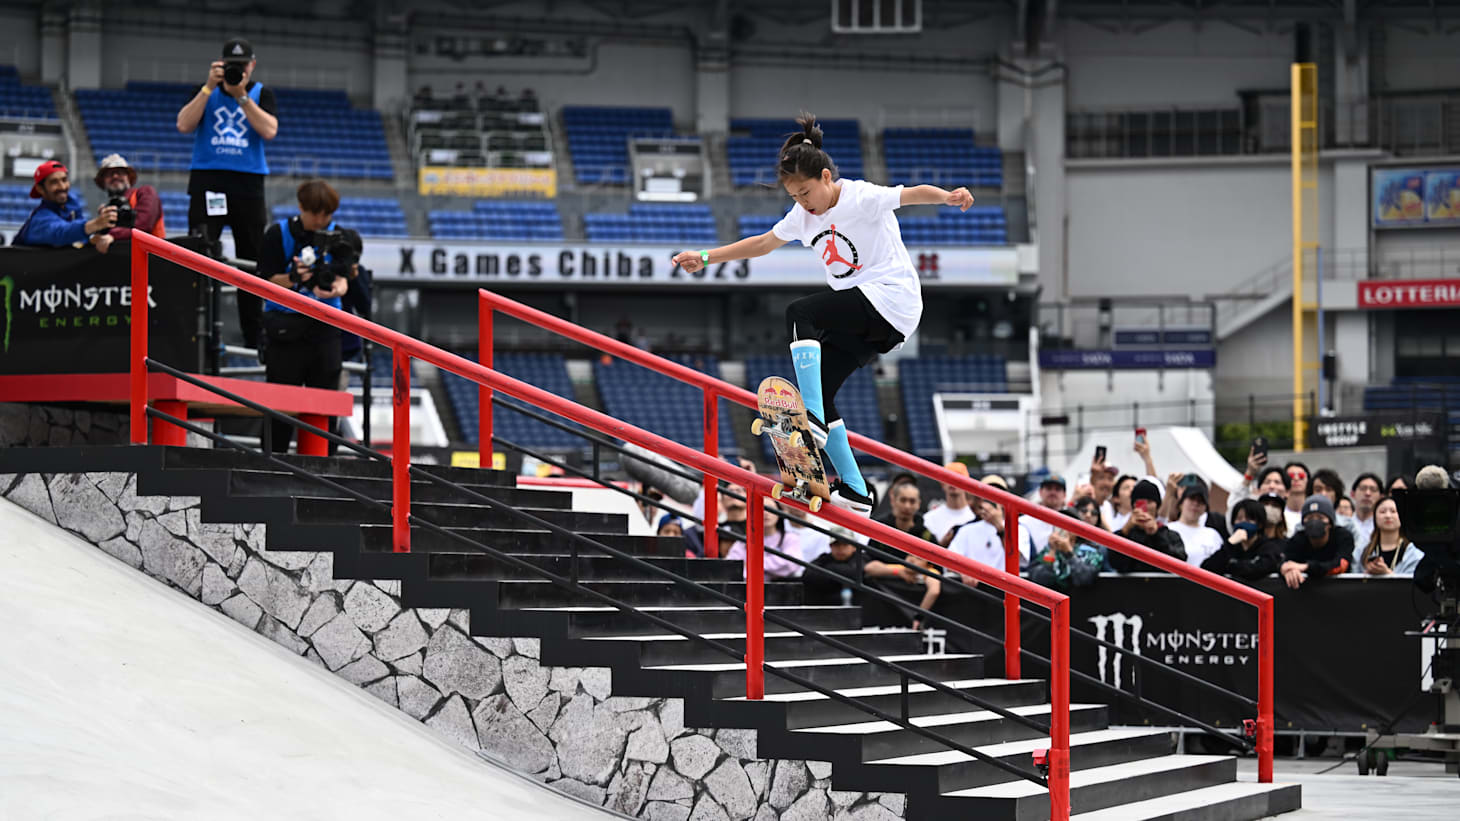 X Games Chiba 2023: All results and scores - complete list